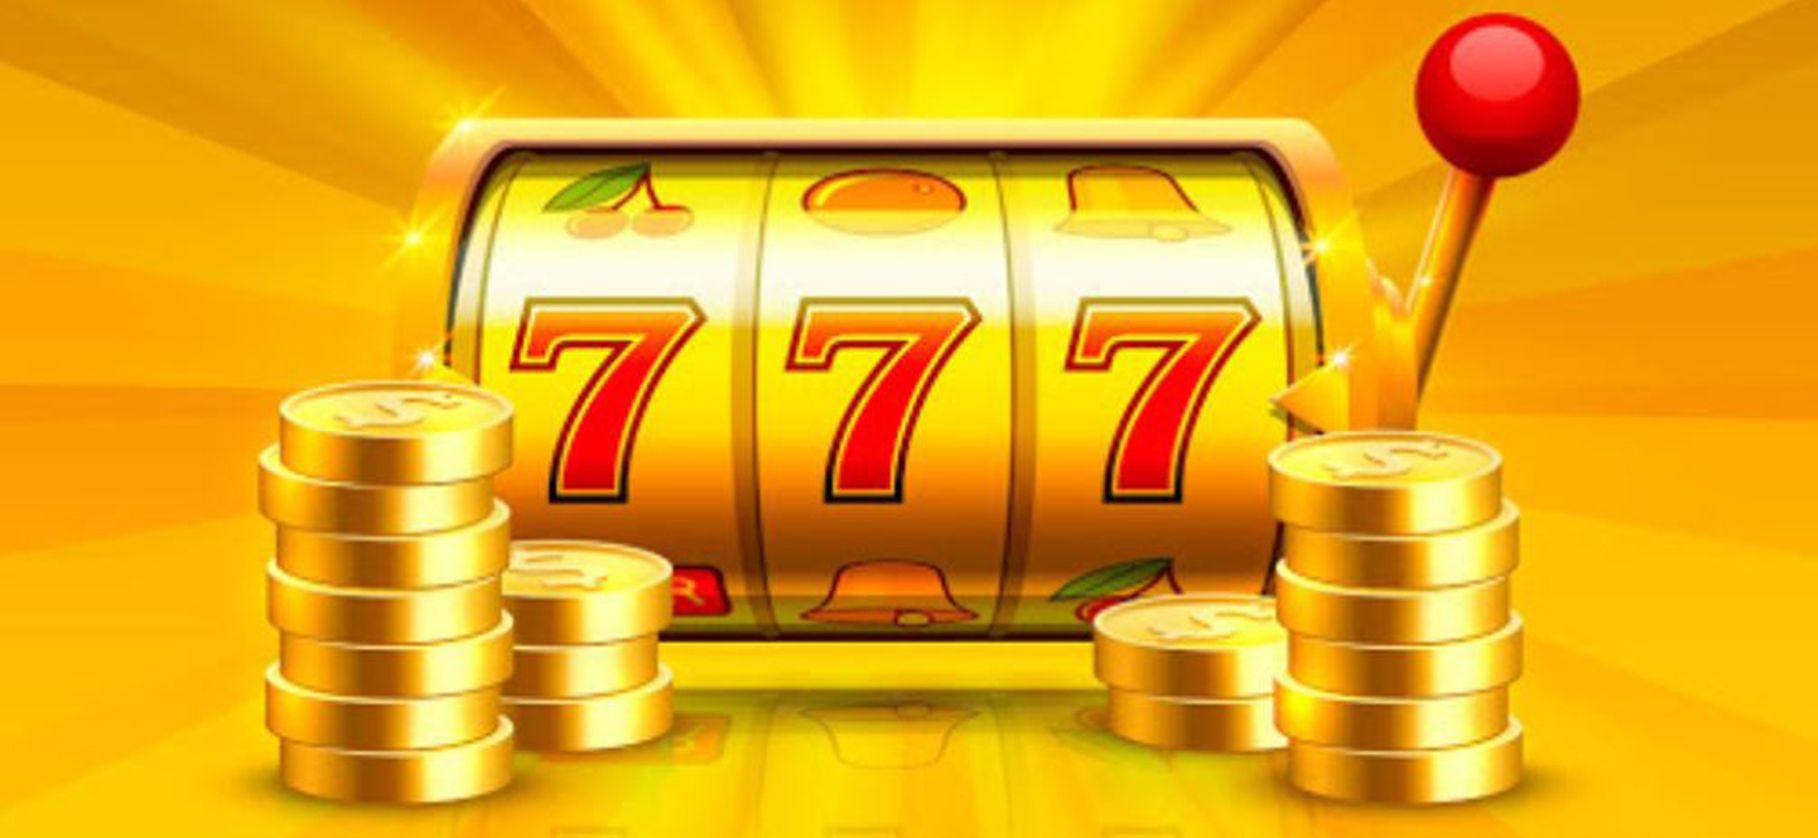 How To Play Jackpot Slots